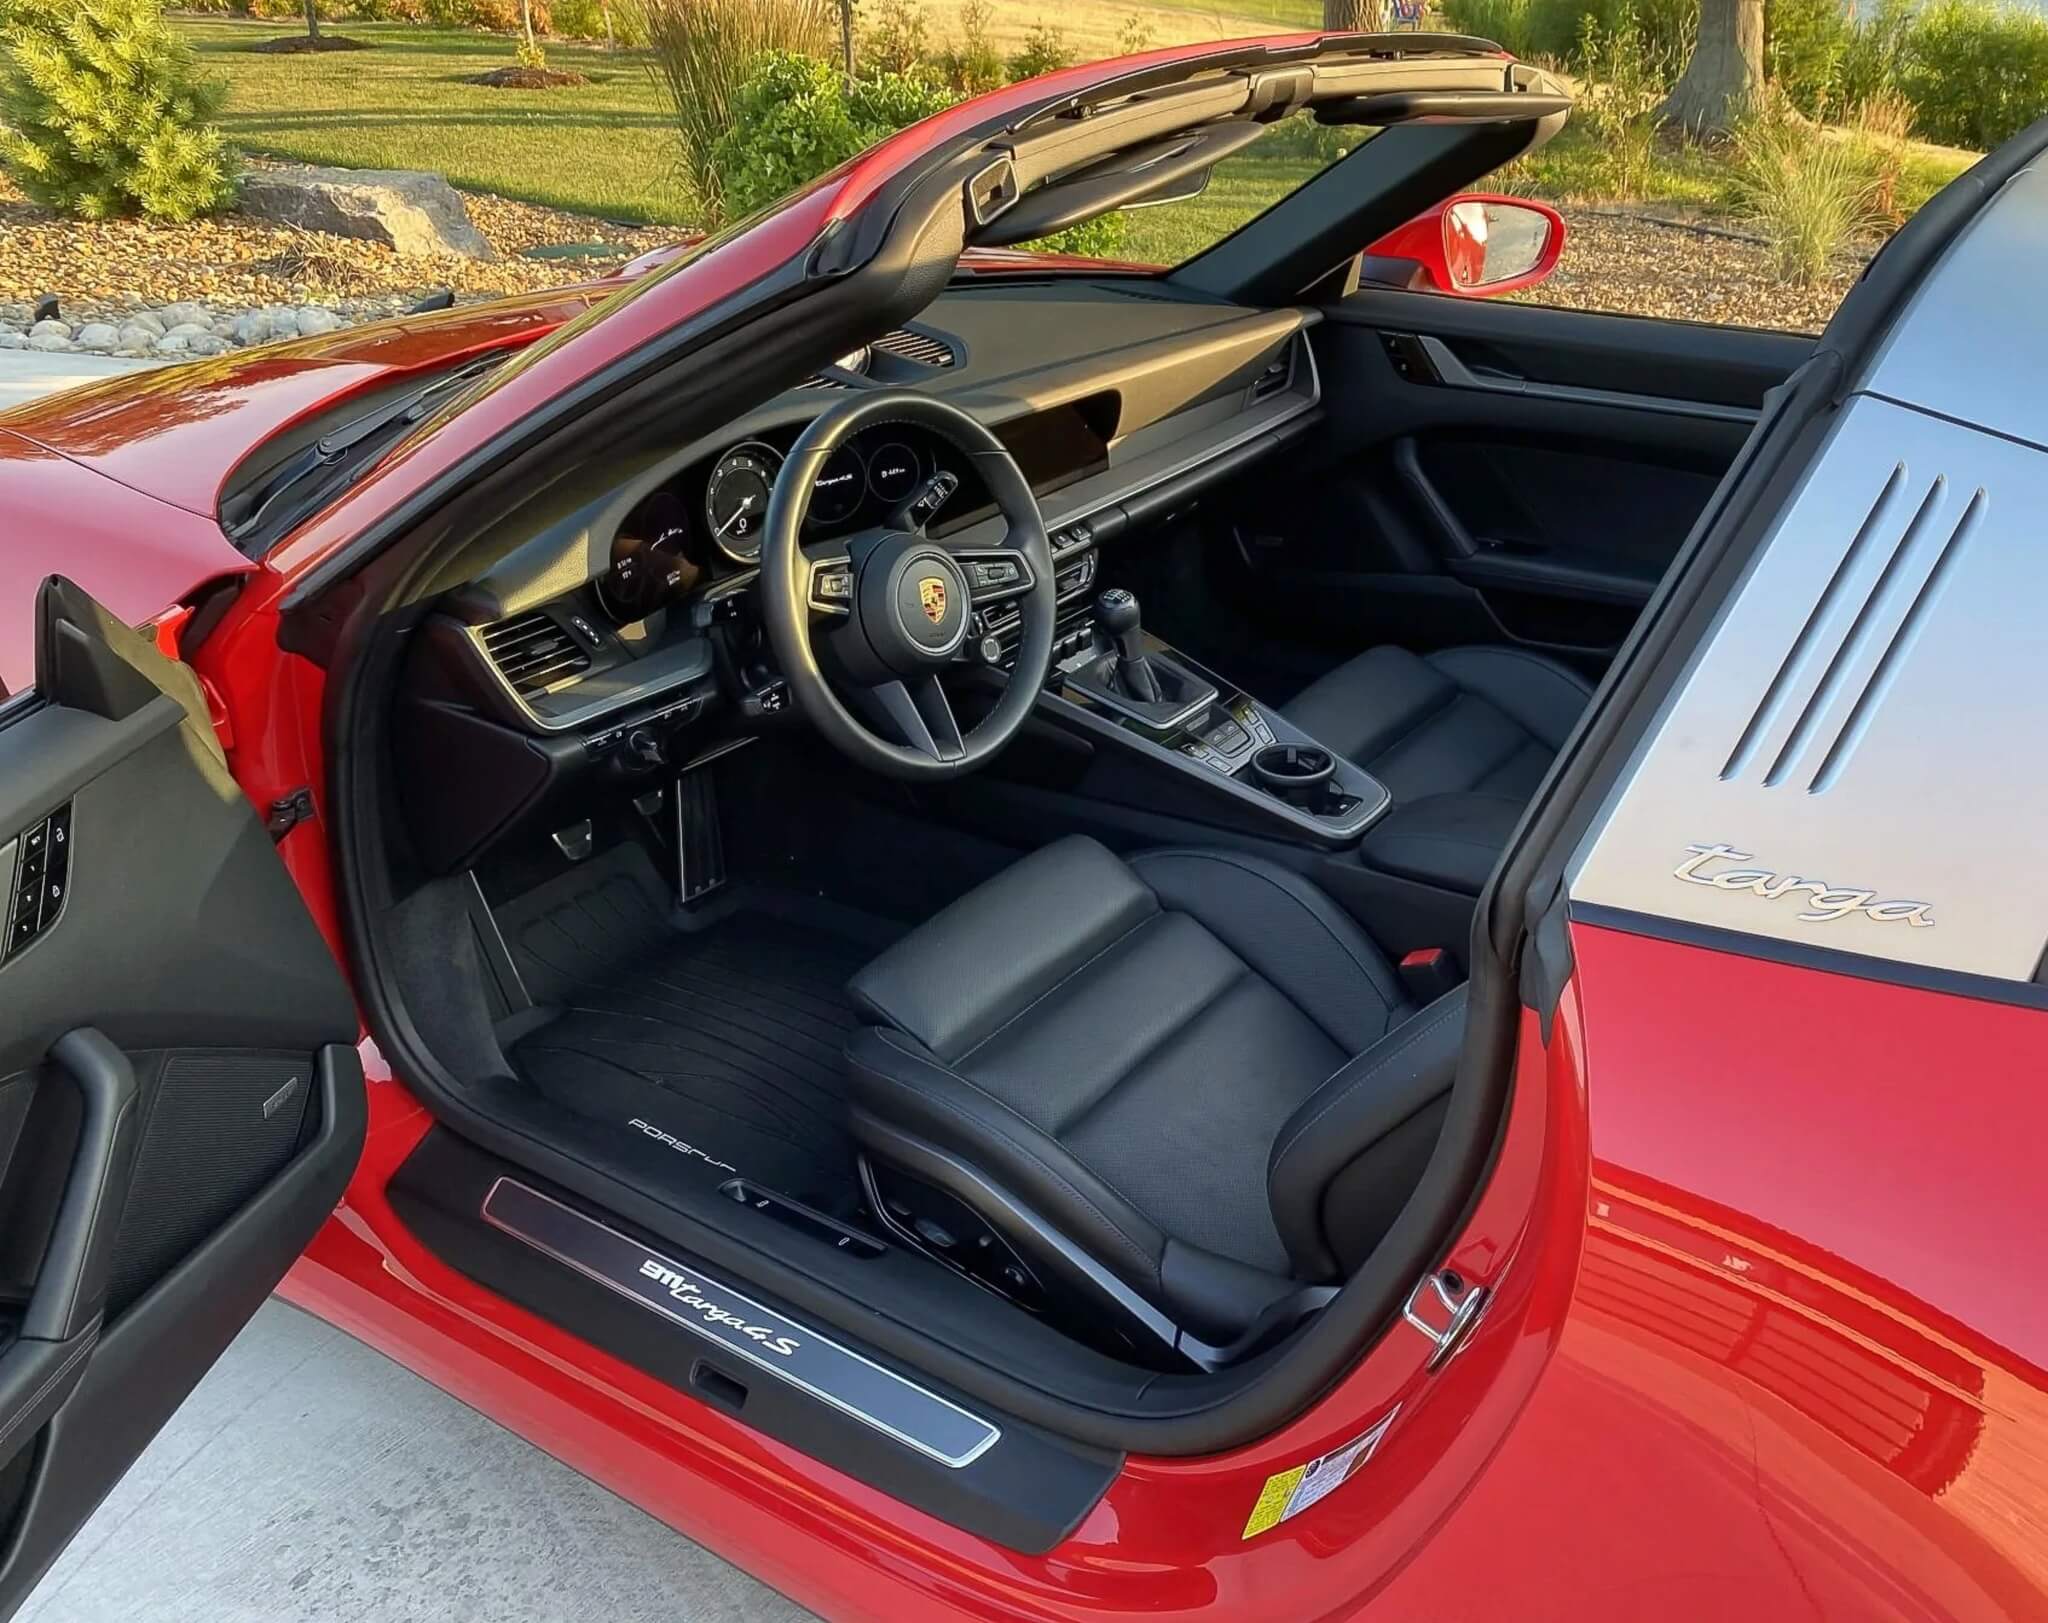 Be The Next Owner Of This Red 2021 Porsche 992 Targa 4S!